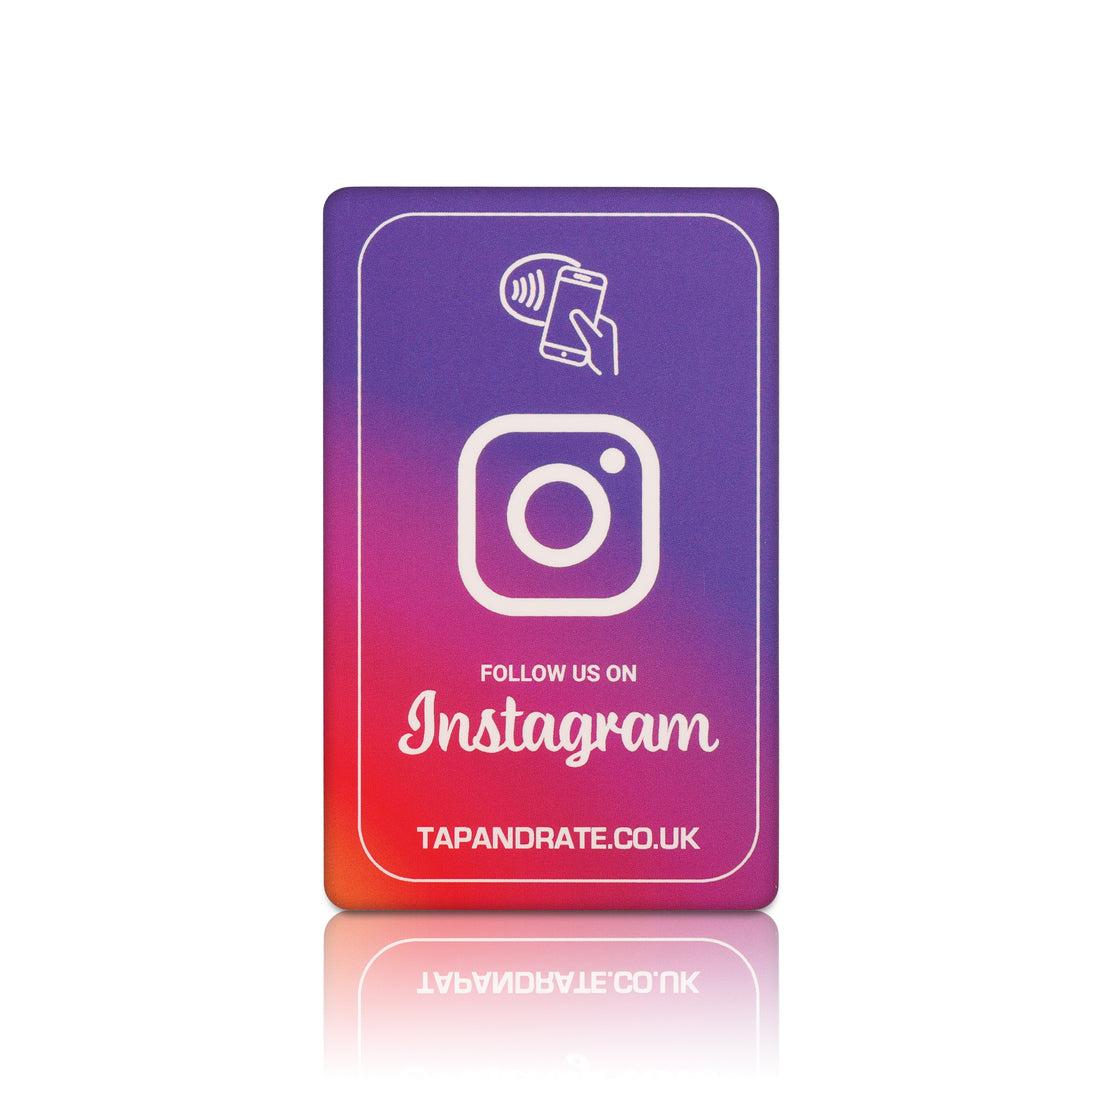 Smart Instagram Card x 3 - Instagram Super Bundle - NFC Enabled Instagram Followers card. Best chip, premium quality. Customers can follow you and see your profile with just one simple tap. No searching or finding your account, comes linked to your account so all the customer has to do is tap their phone and follow your profile. Ready to use out of the box! Start getting more followers today. Get more Customer with this simple to use product. Tap and Rate